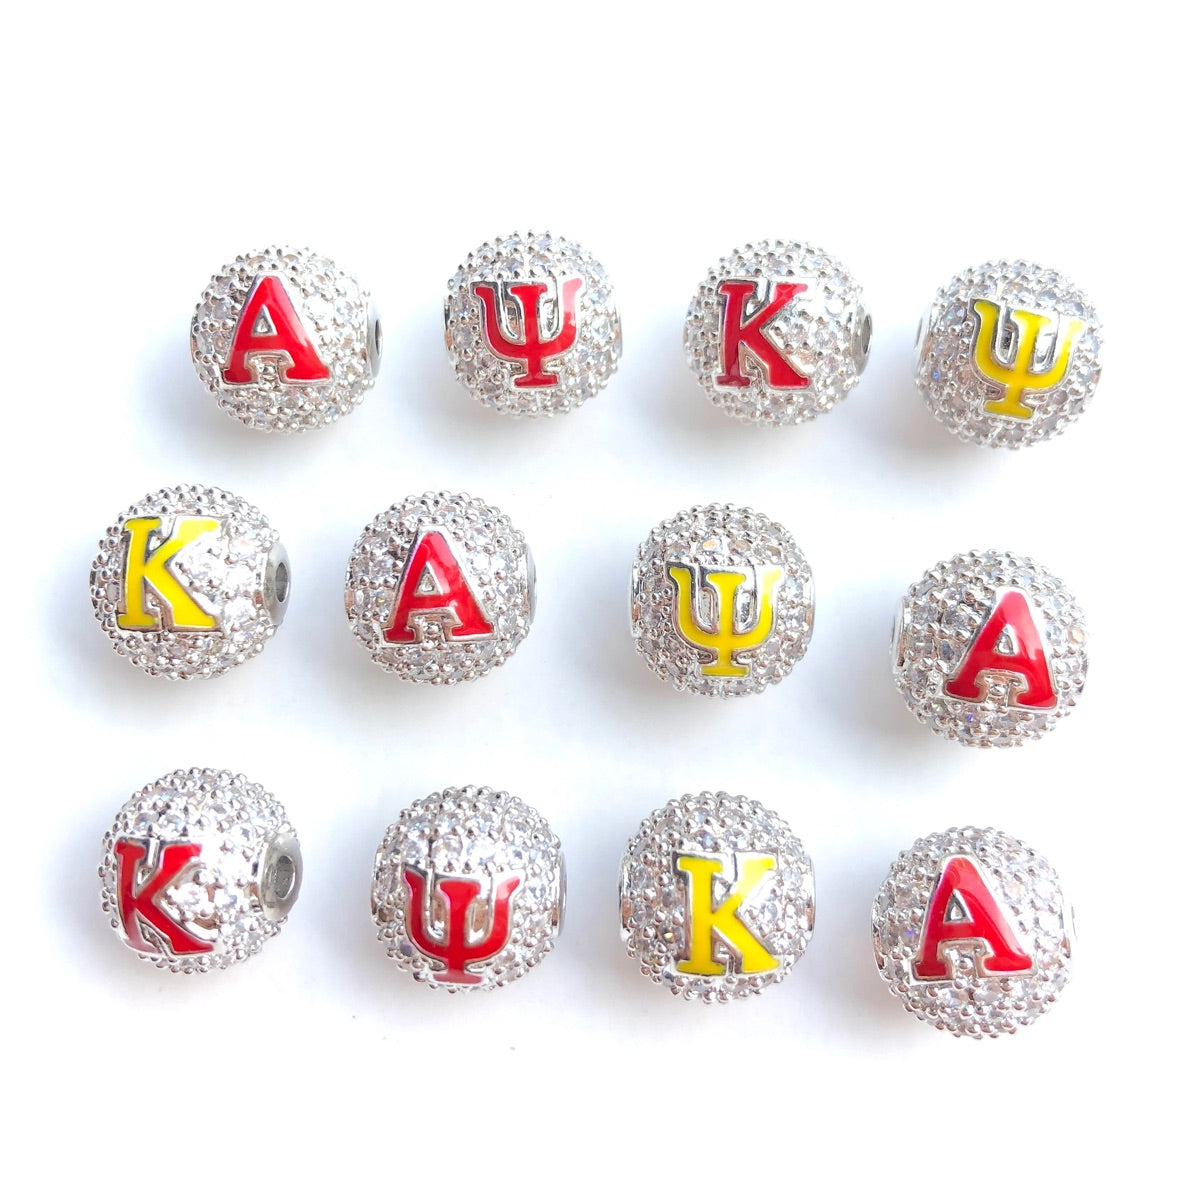 12pcs/lot 10mm Red Yellow Enamel CZ Paved Greek Letter "K", "A", "Ψ" Ball Spacers Beads Mix Silver Letters 4 Letters Each CZ Paved Spacers 10mm Beads Ball Beads Greek Letters New Spacers Arrivals Charms Beads Beyond